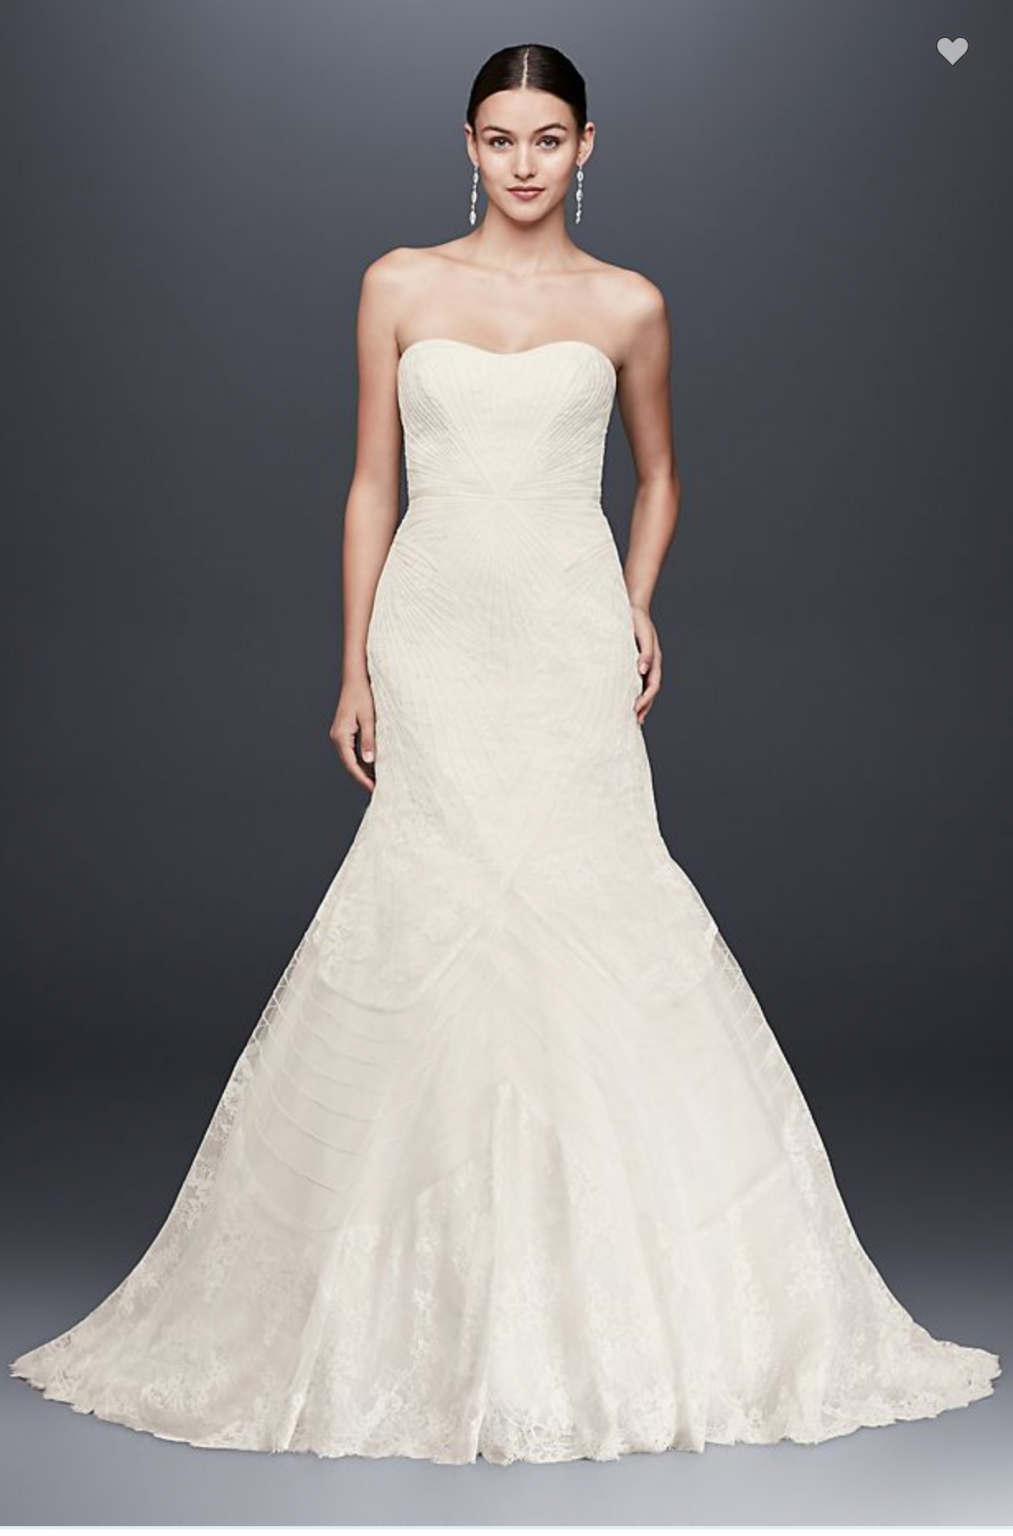 Zac Posen Strapless Fit and Flare Wedding Dress